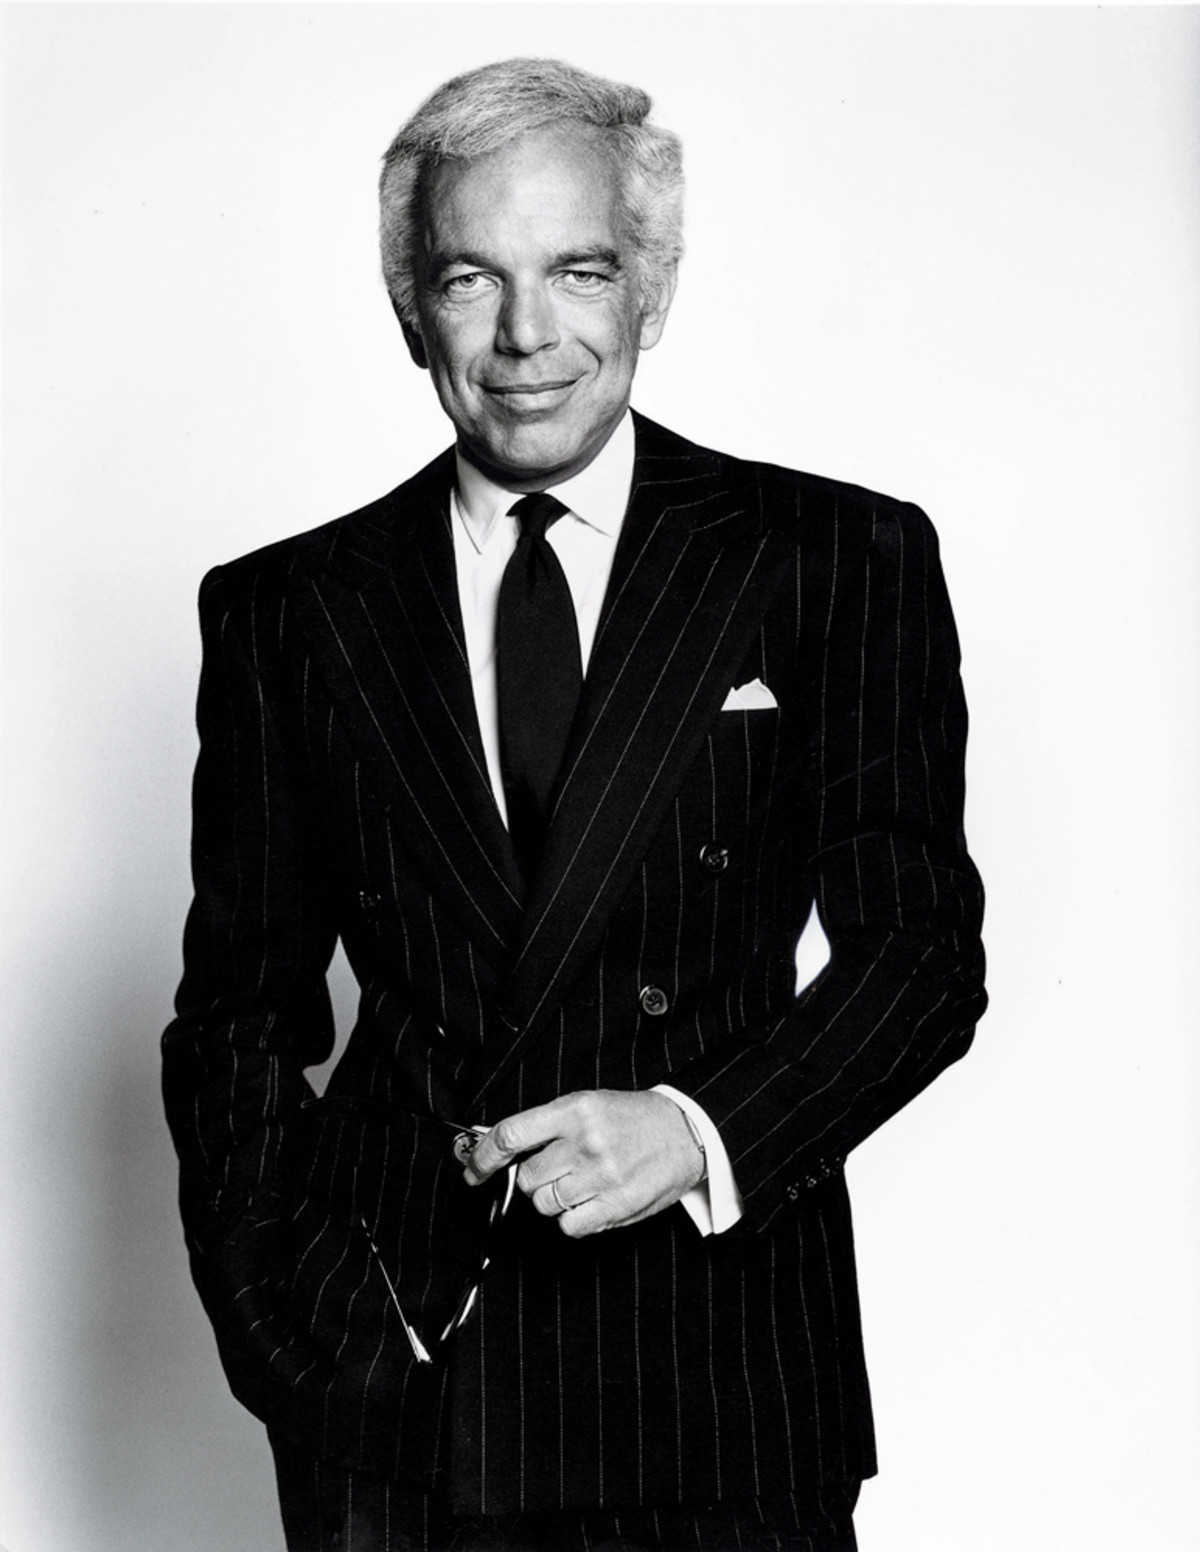 Ralph Lauren Speaks About What He s Most Proud of and Why People Can t